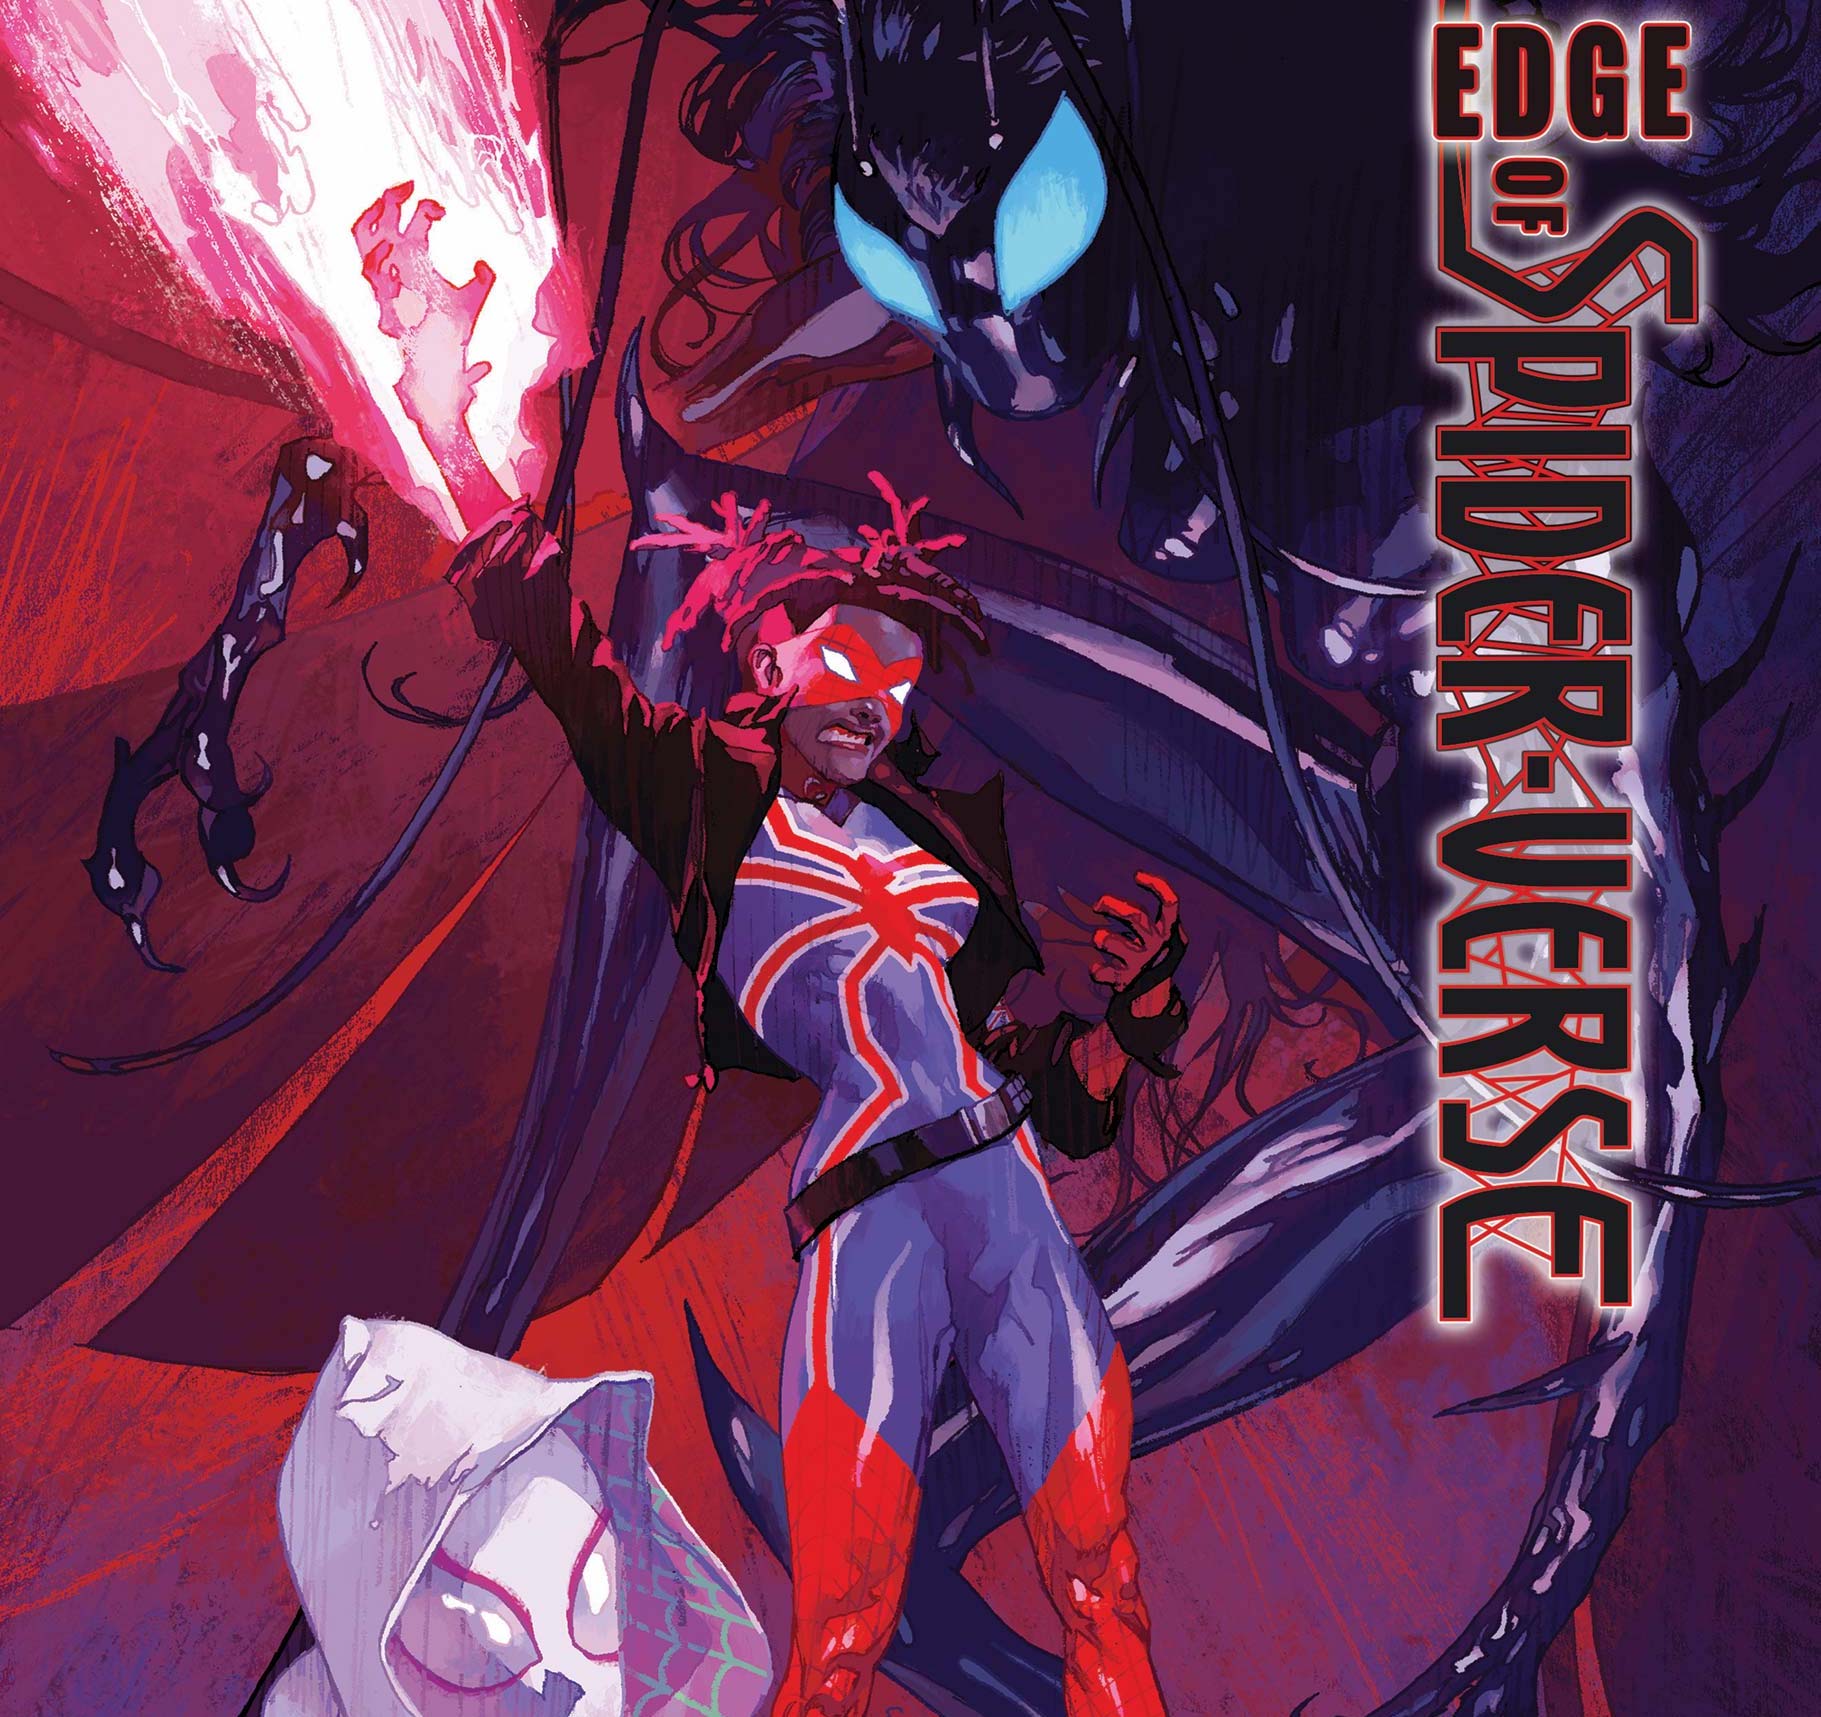 'Edge of Spider-Verse' #2 features the great new Spider-UK character